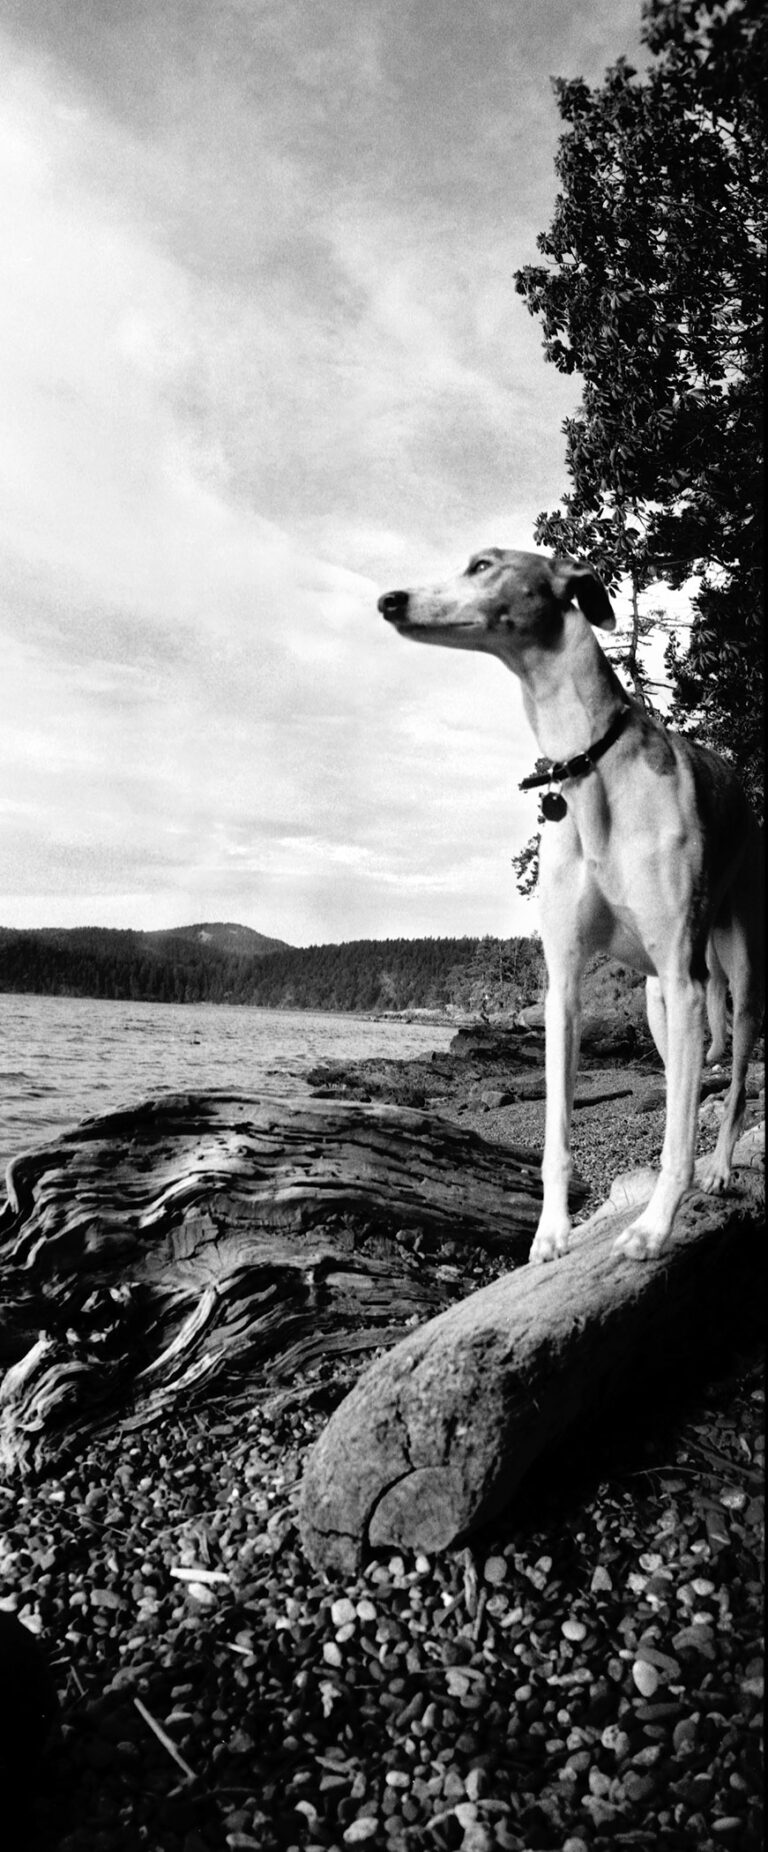 A vertical panorama of a whippet dog standing on a log on a beaach.